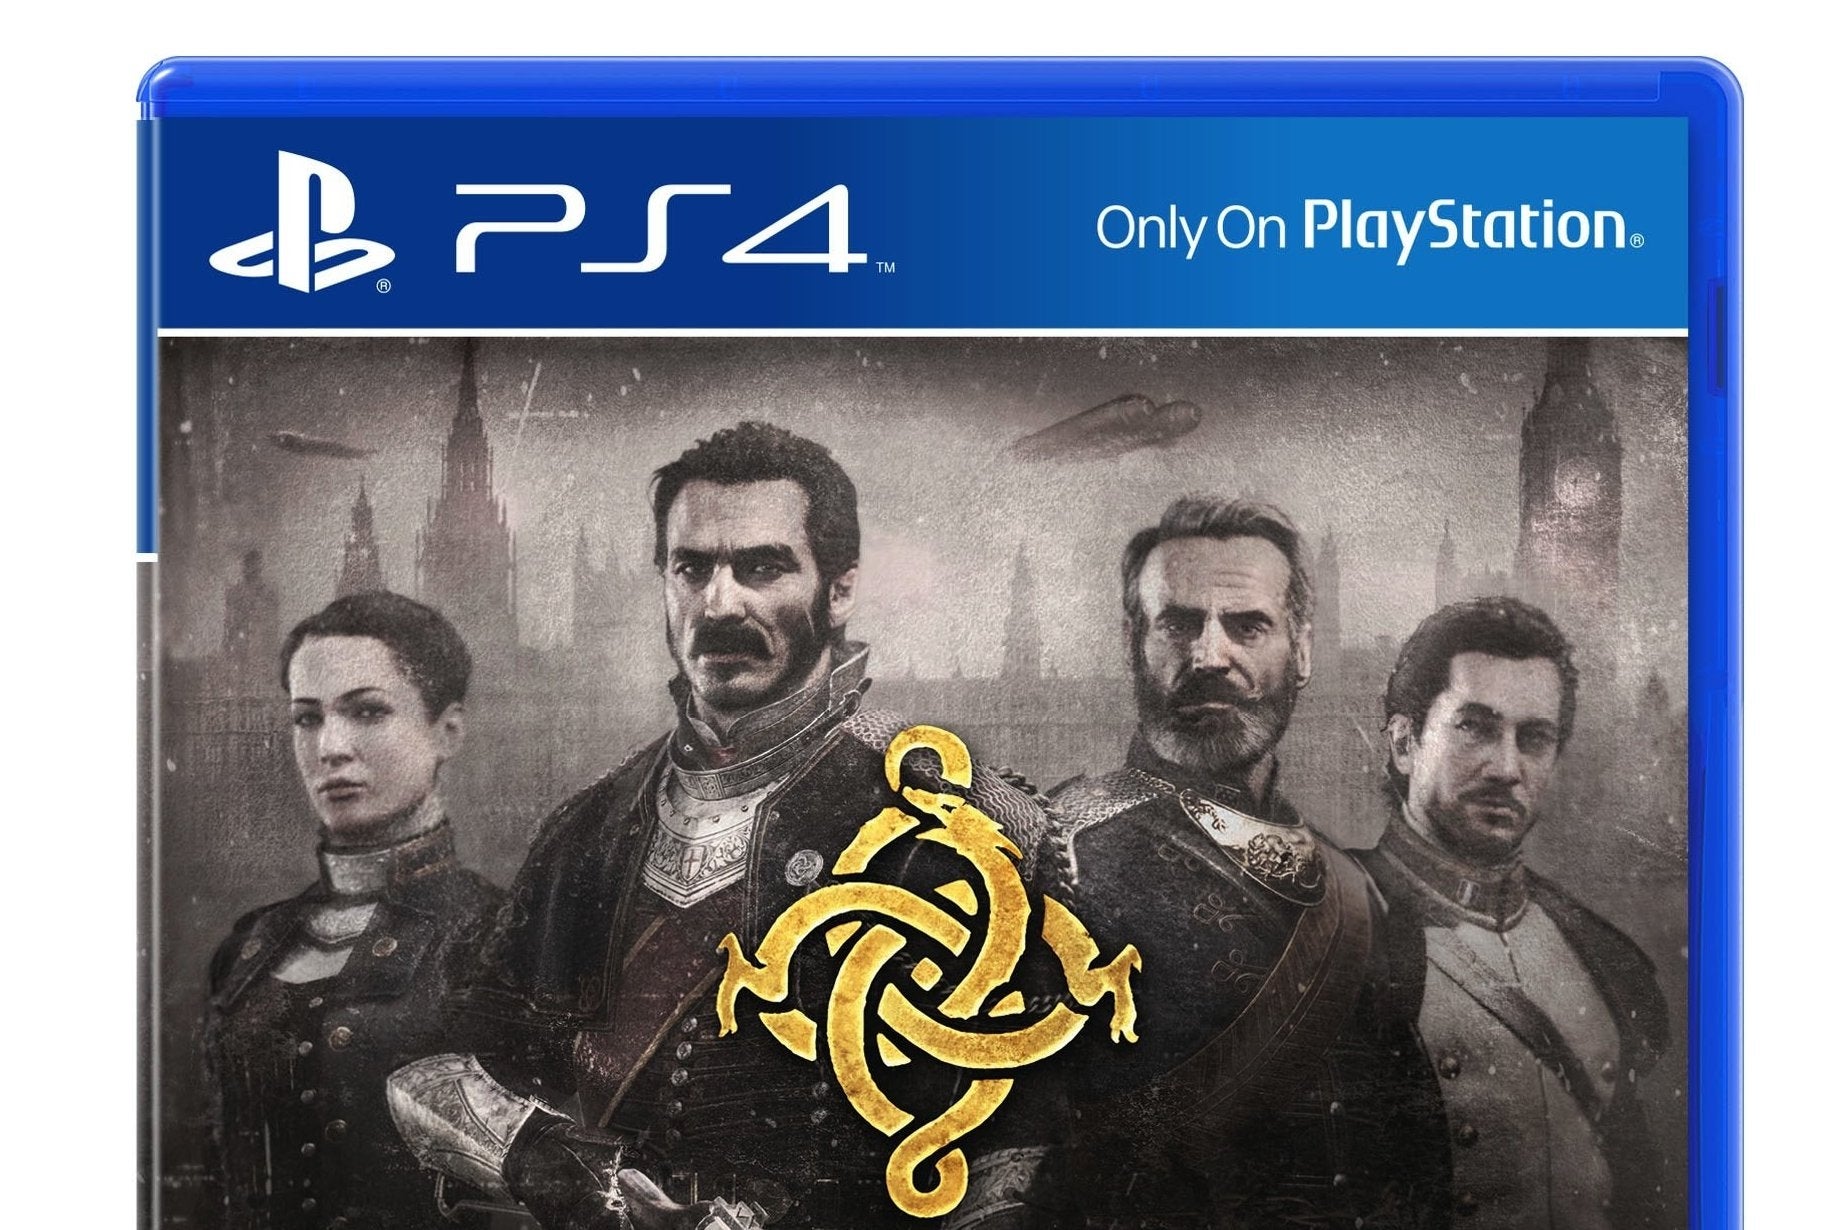 Image for The Order: 1886 release date confirmed